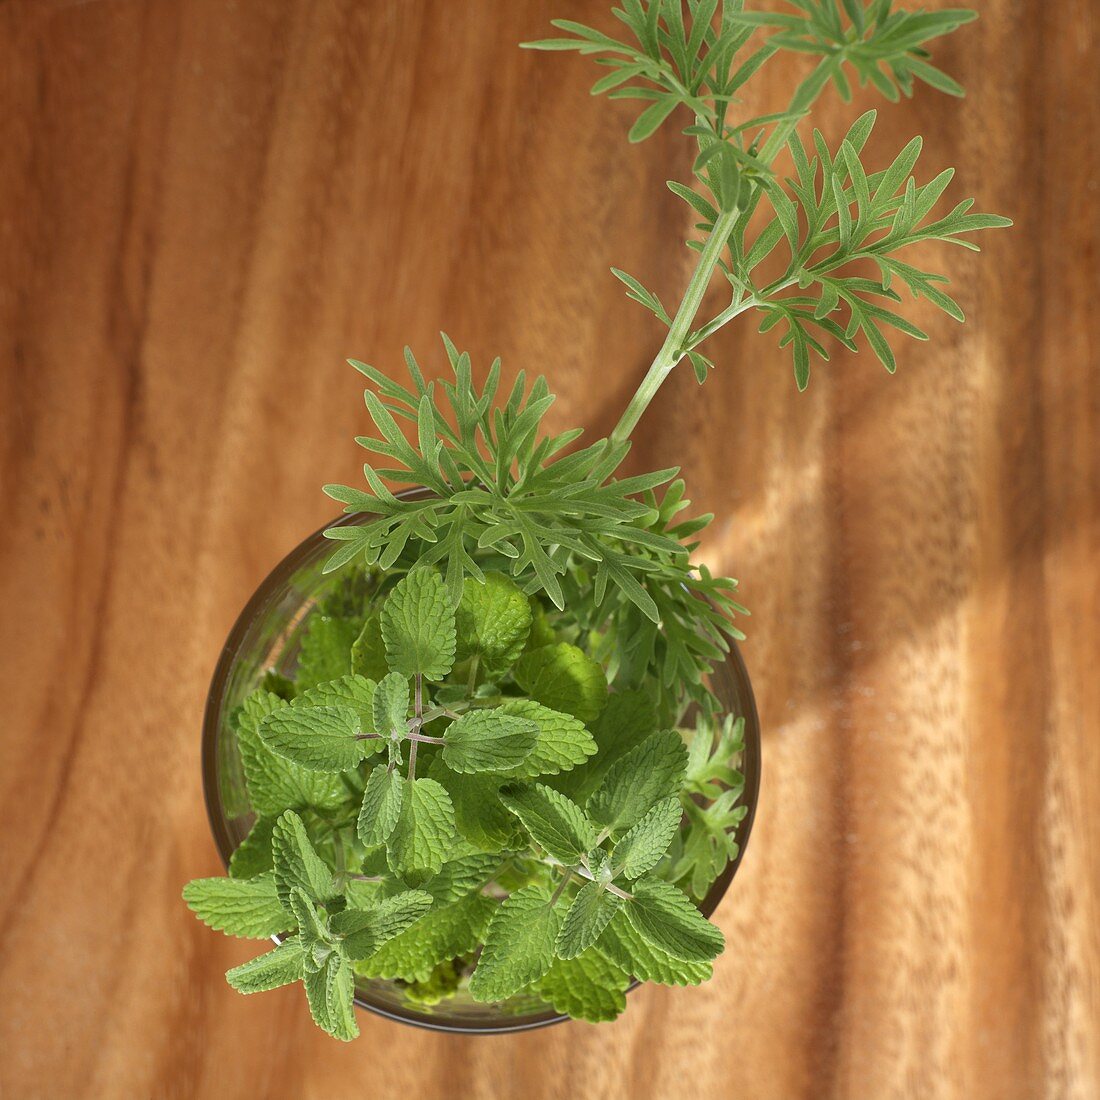 Culinary herbs in a glass